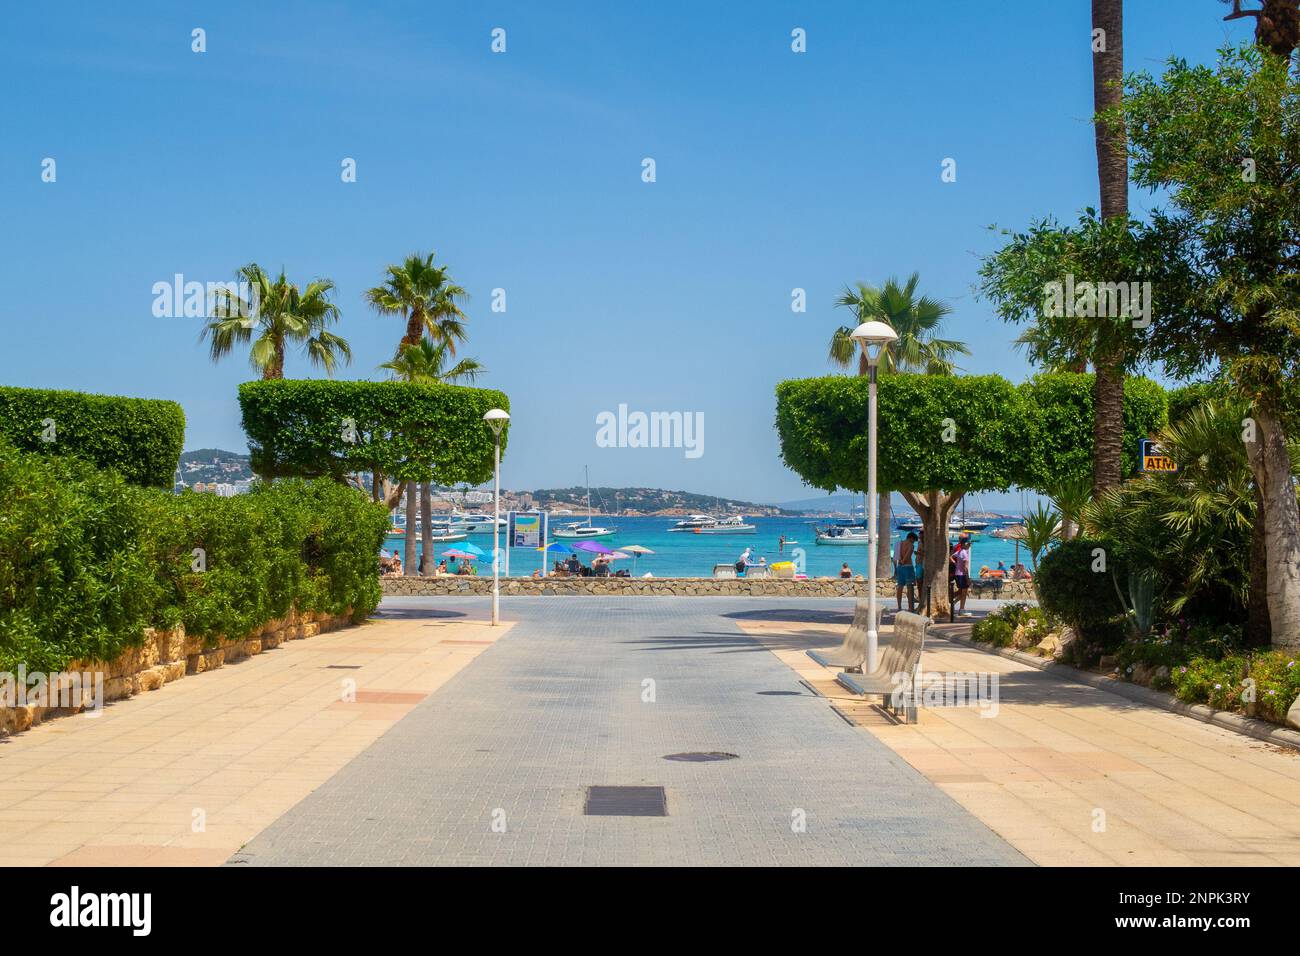 MAJORCA, SPAIN - 21ST MAY 22: A Path leading towards the beach and sea in Majorca Spain. People can be seen. Stock Photo